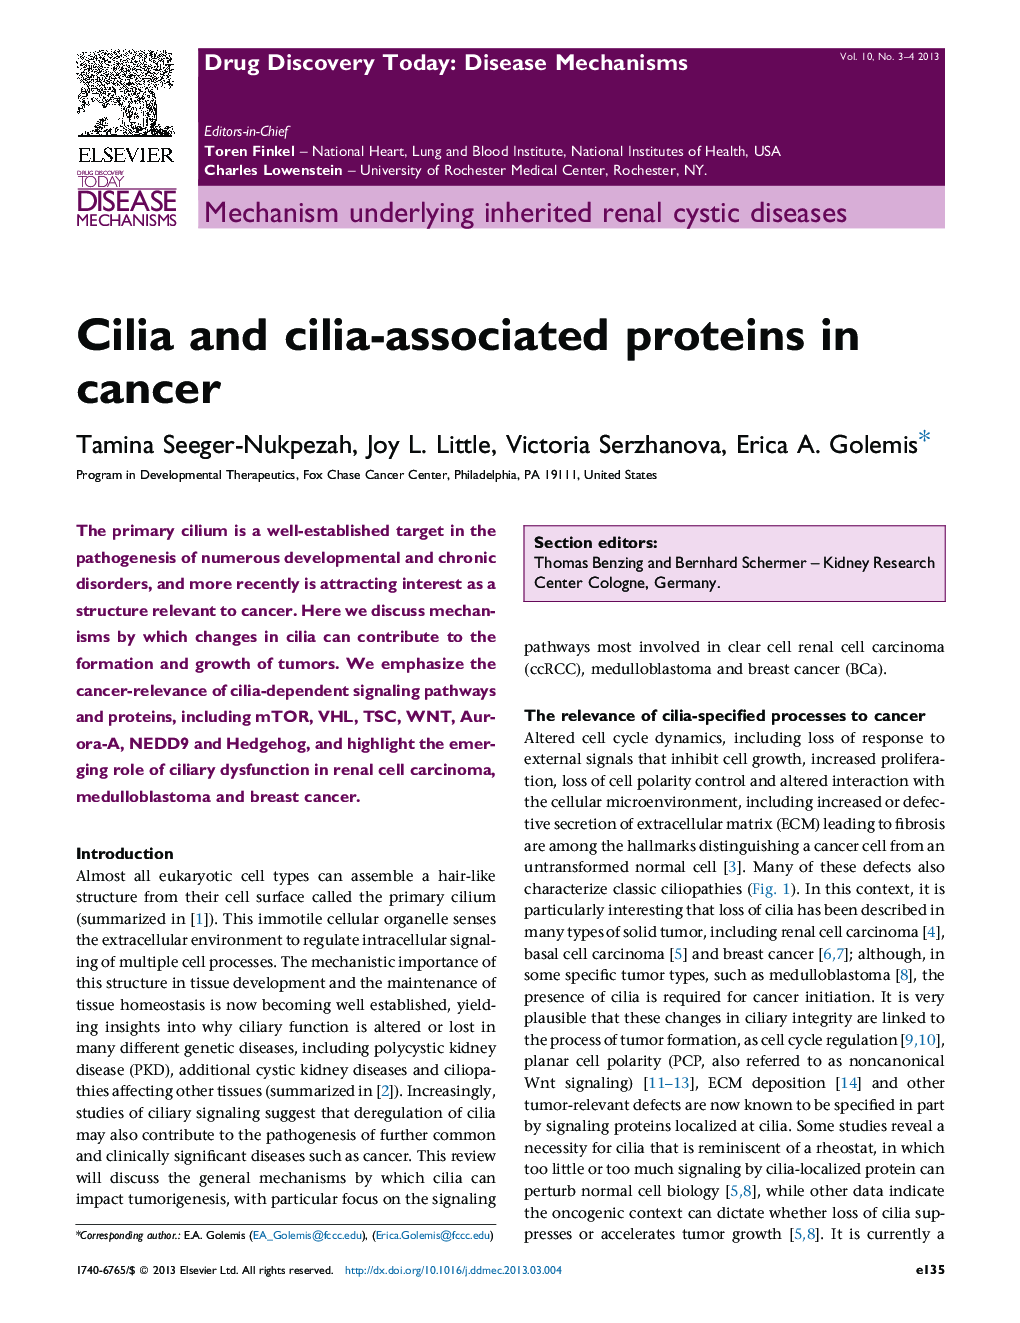 Cilia and cilia-associated proteins in cancer